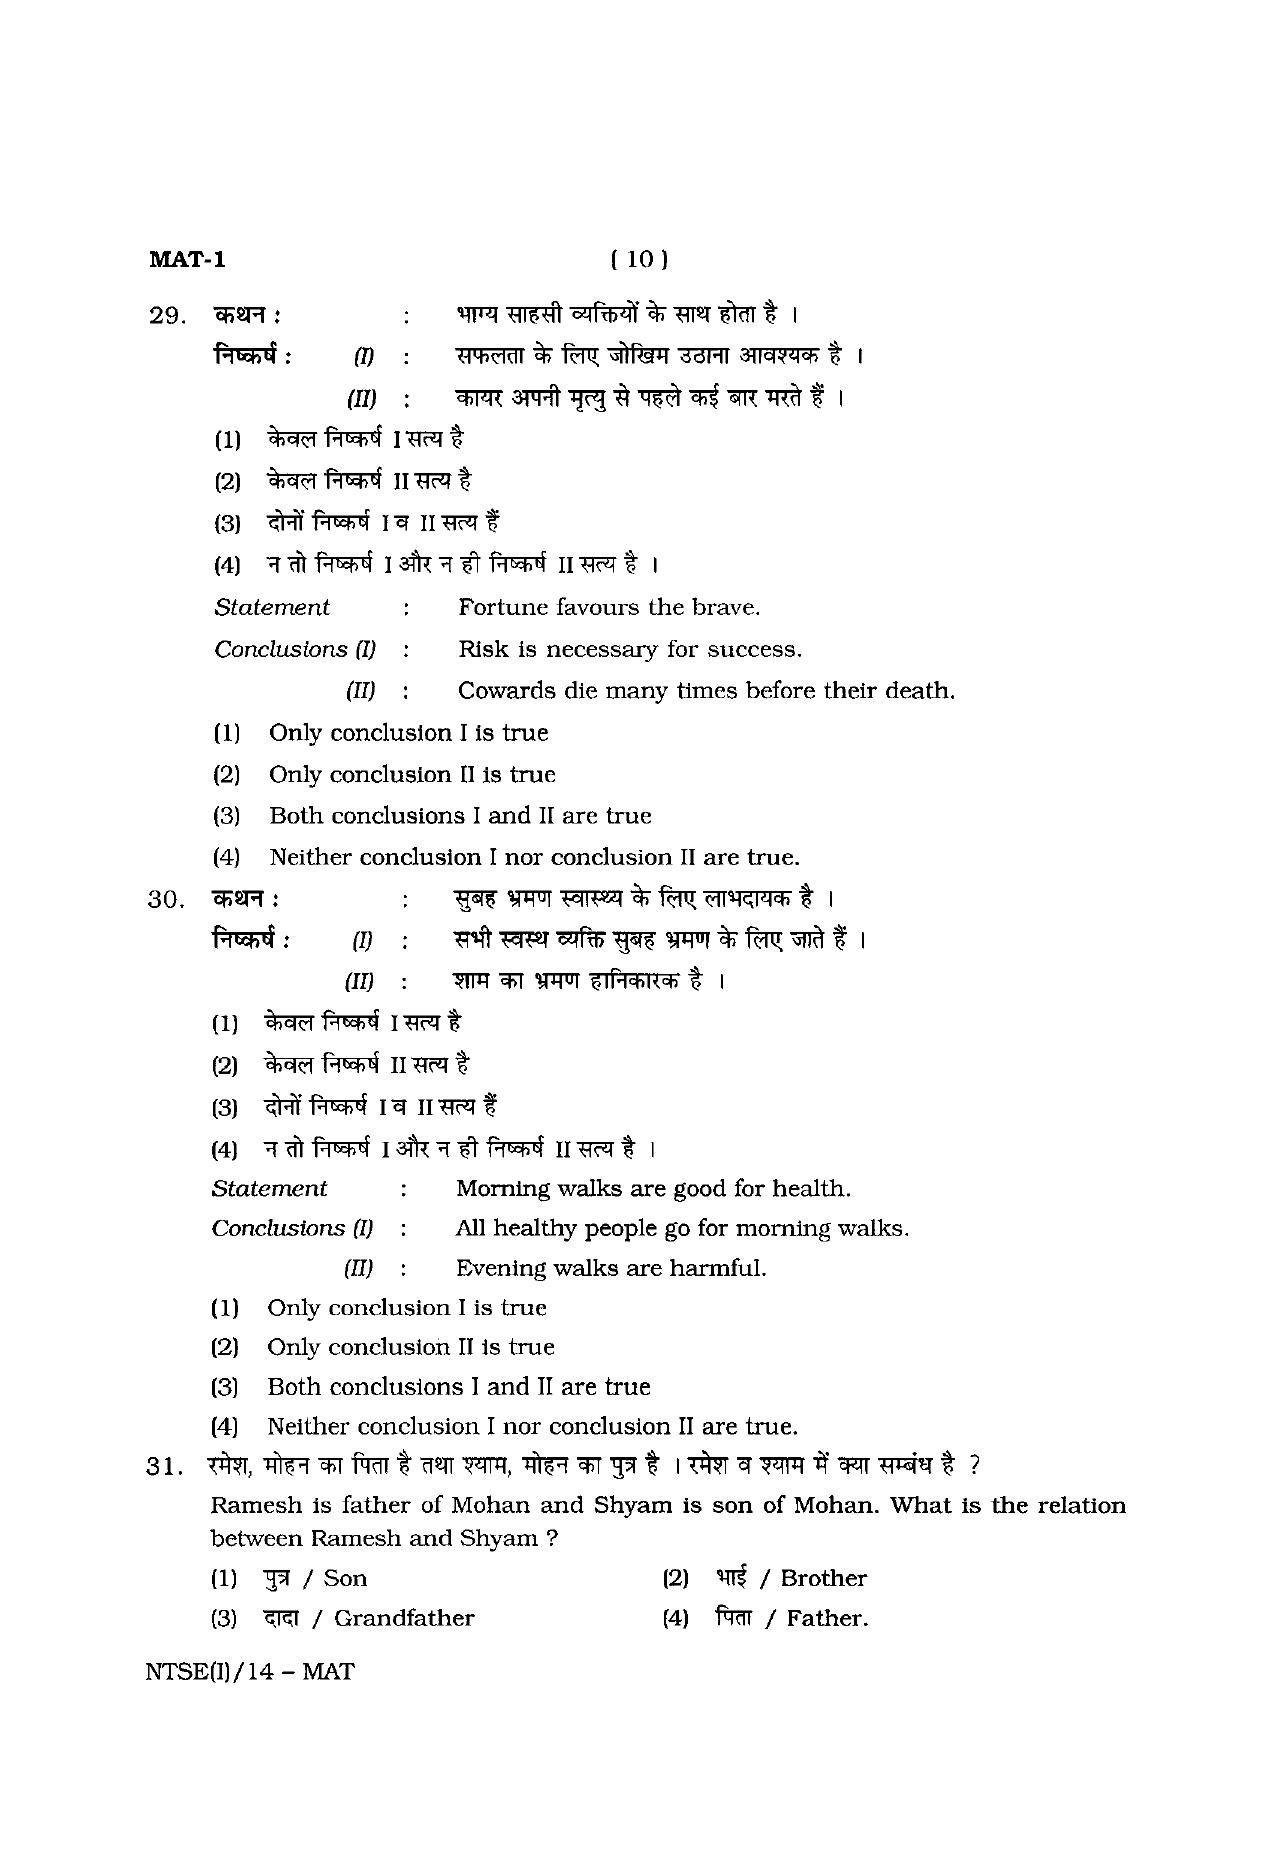 NTSE 2014 (Stage II) MAT Question Paper - Page 10